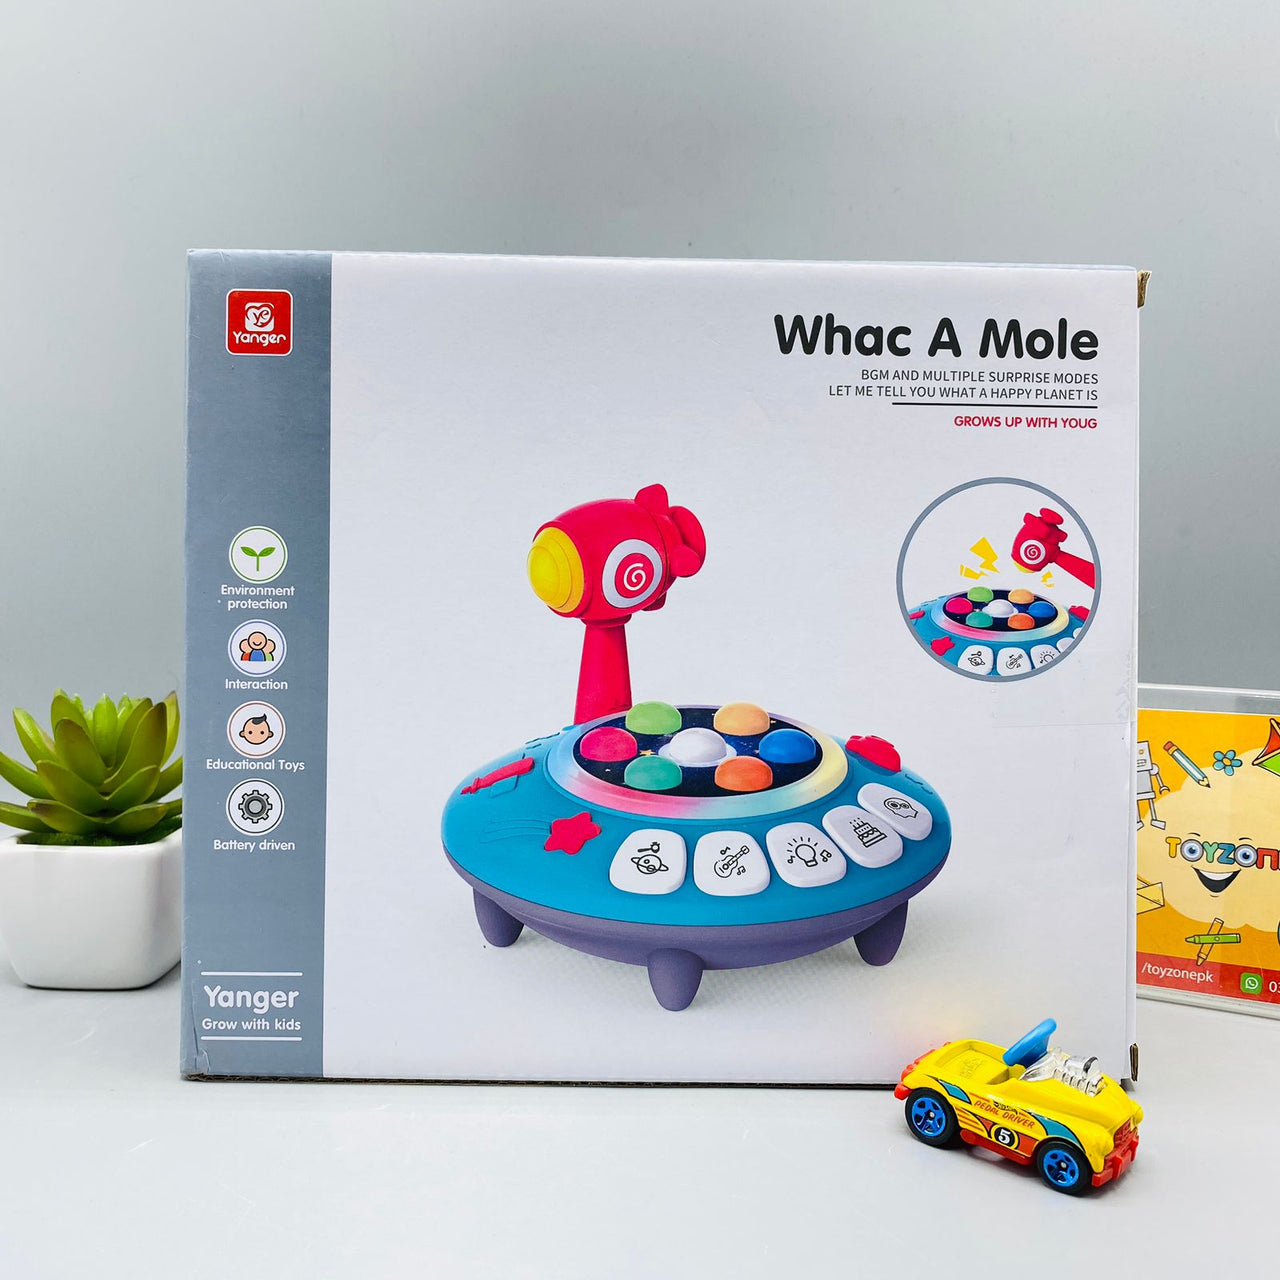 whac a mole knocking early educational toy